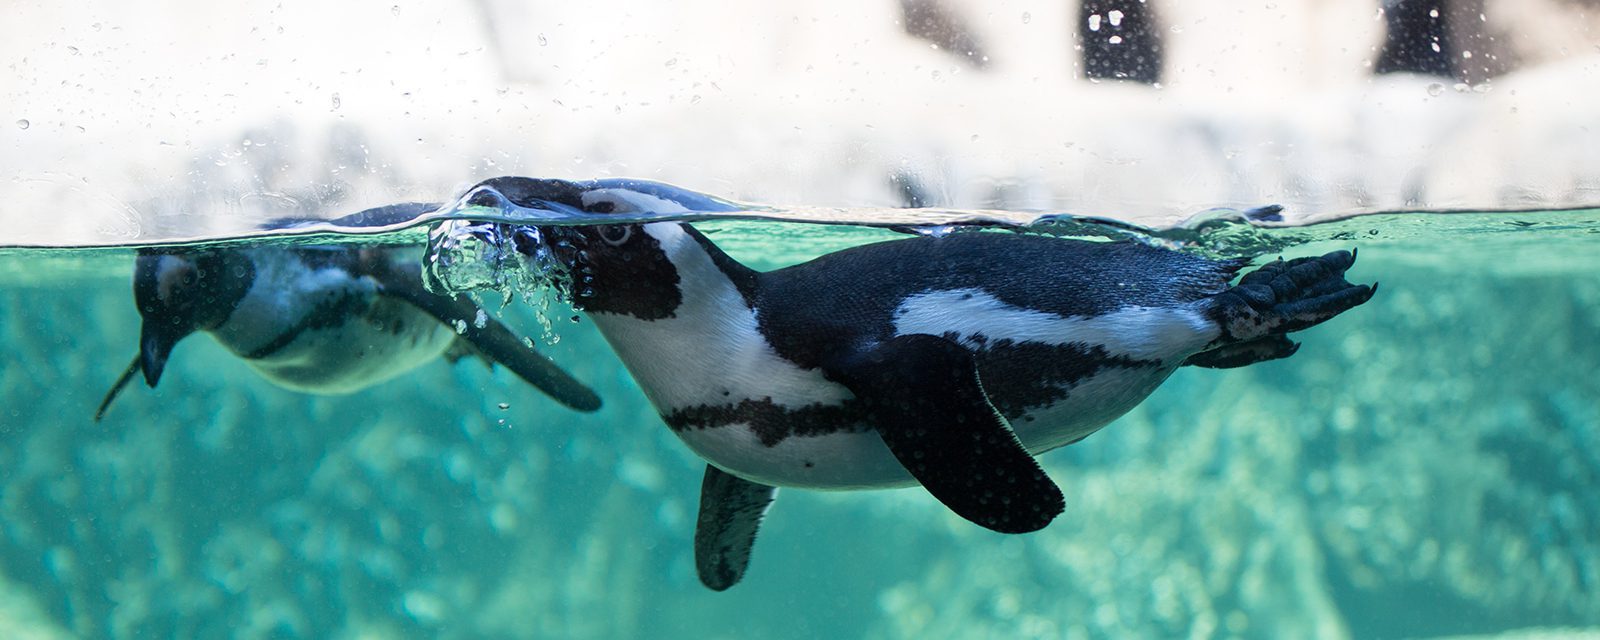 Two African penguins swimming in exhibit